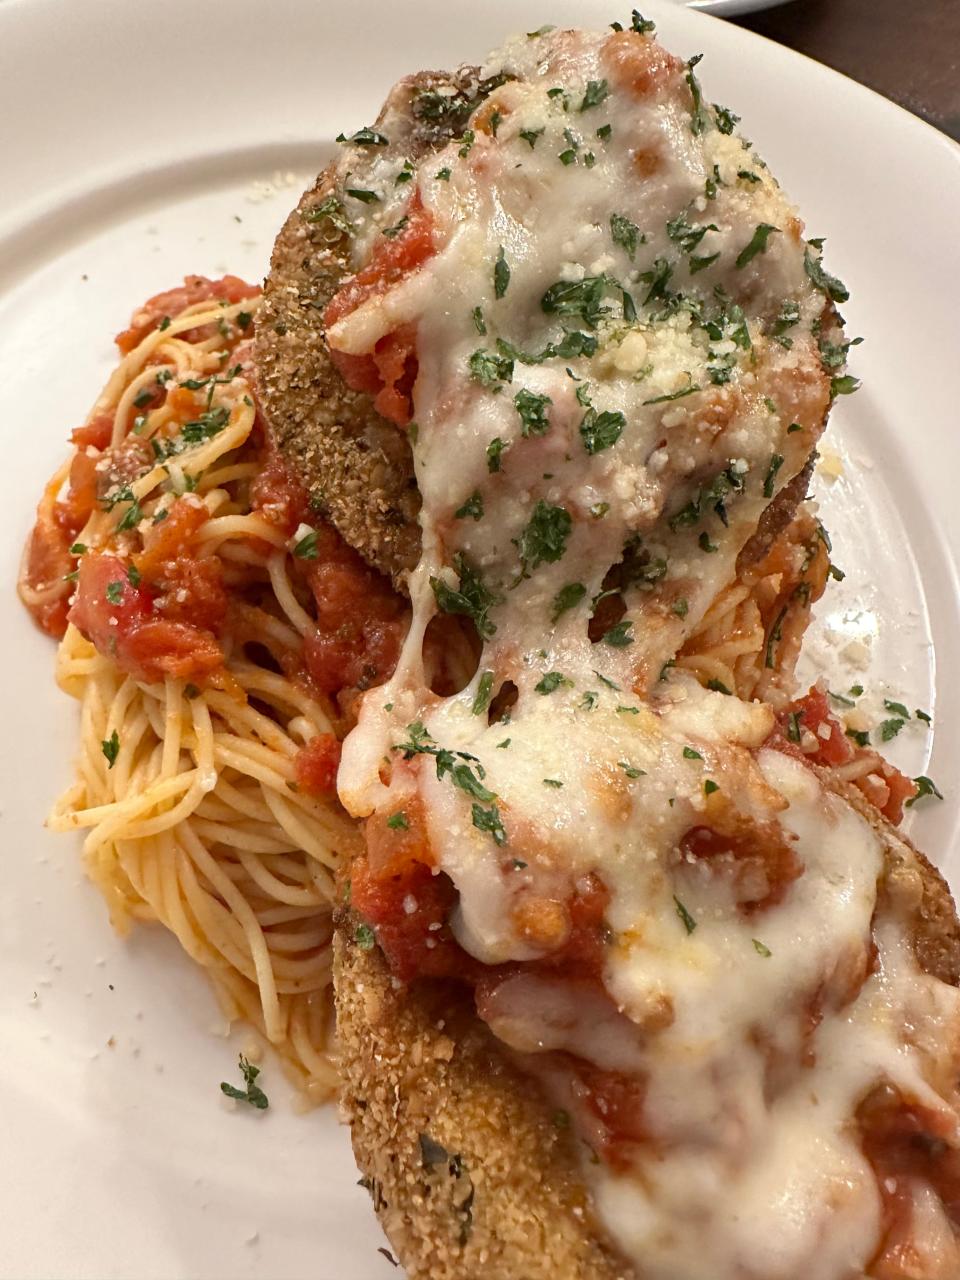 Eggplant parmesan, lightly breaded and sauteed, with a side of angel hair pasta, is among the entrees offered at the new Maisano's Little Italian Kitchen in Plain Township.